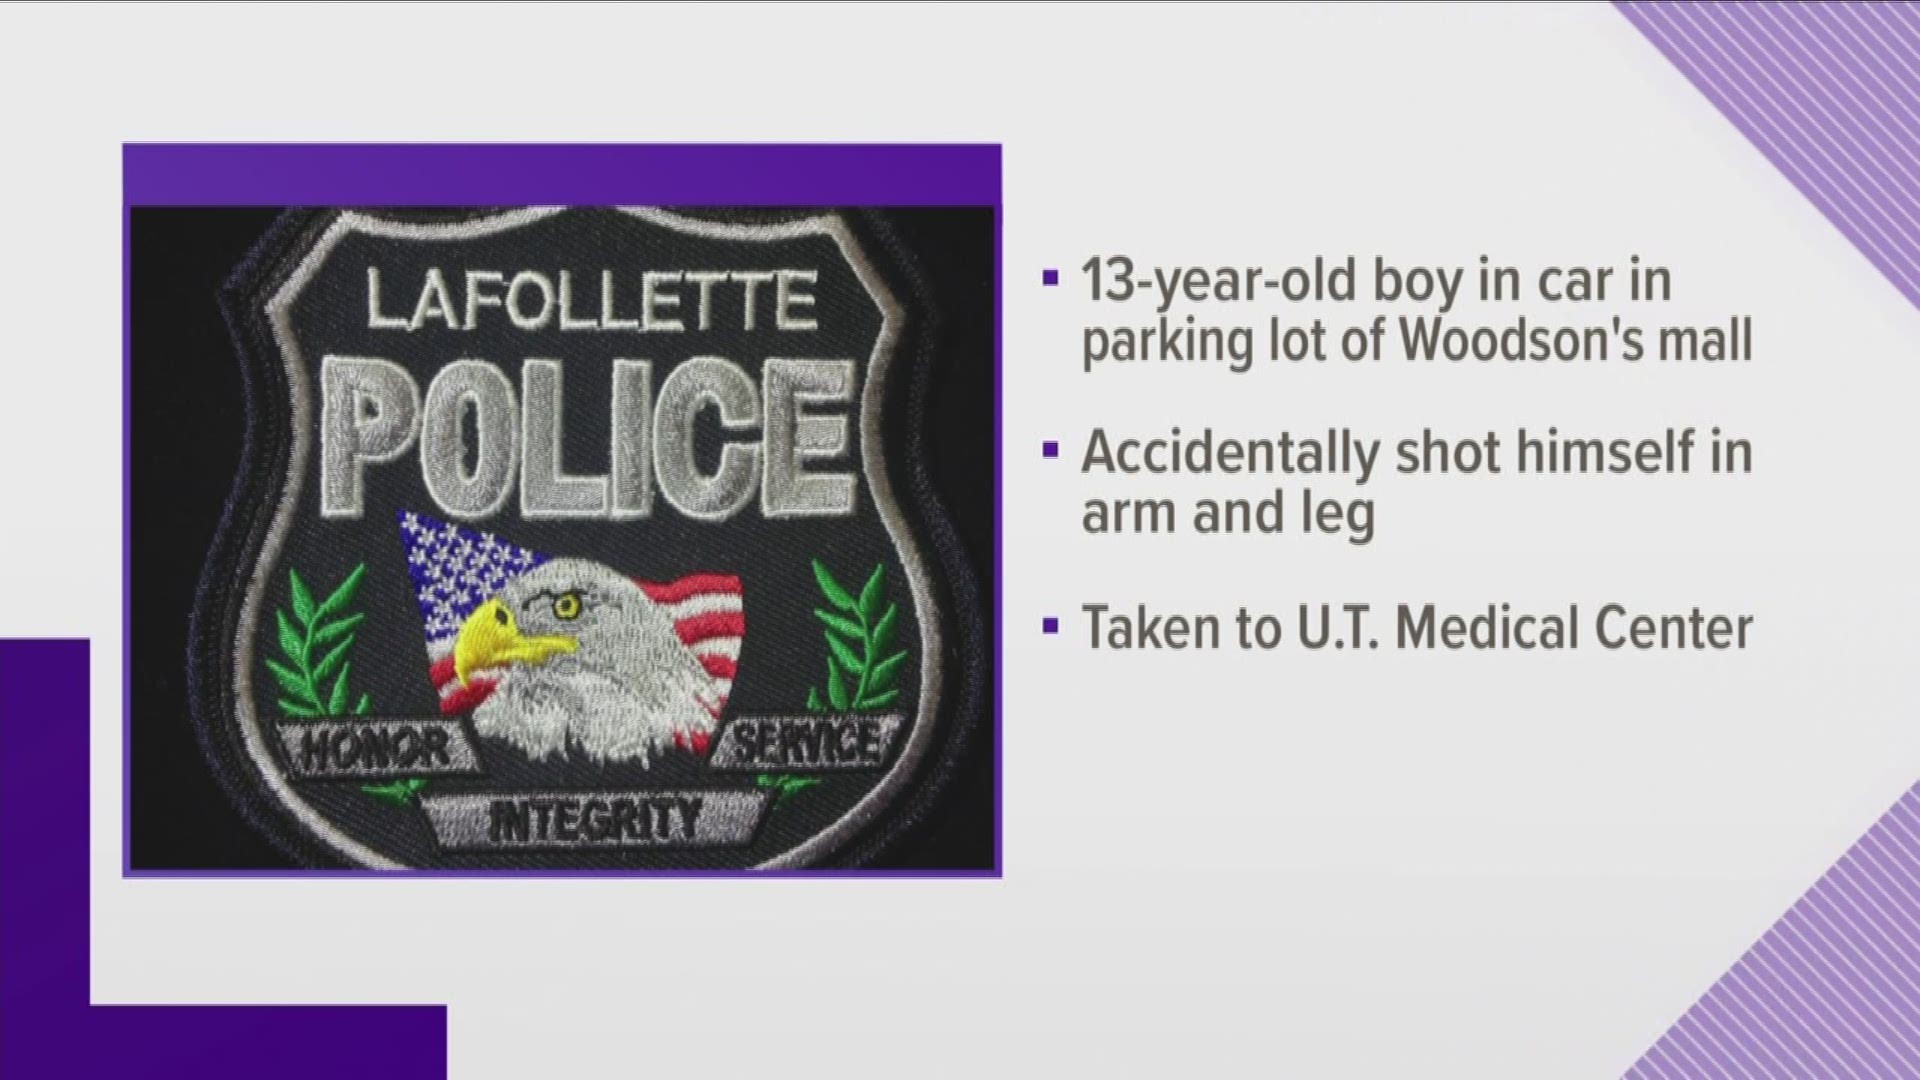 LaFollette Police said a 13-year-old boy was in his parents' vehicle when he took a 9 mm handgun from the dashboard and accidentally shot himself in the arm and leg.